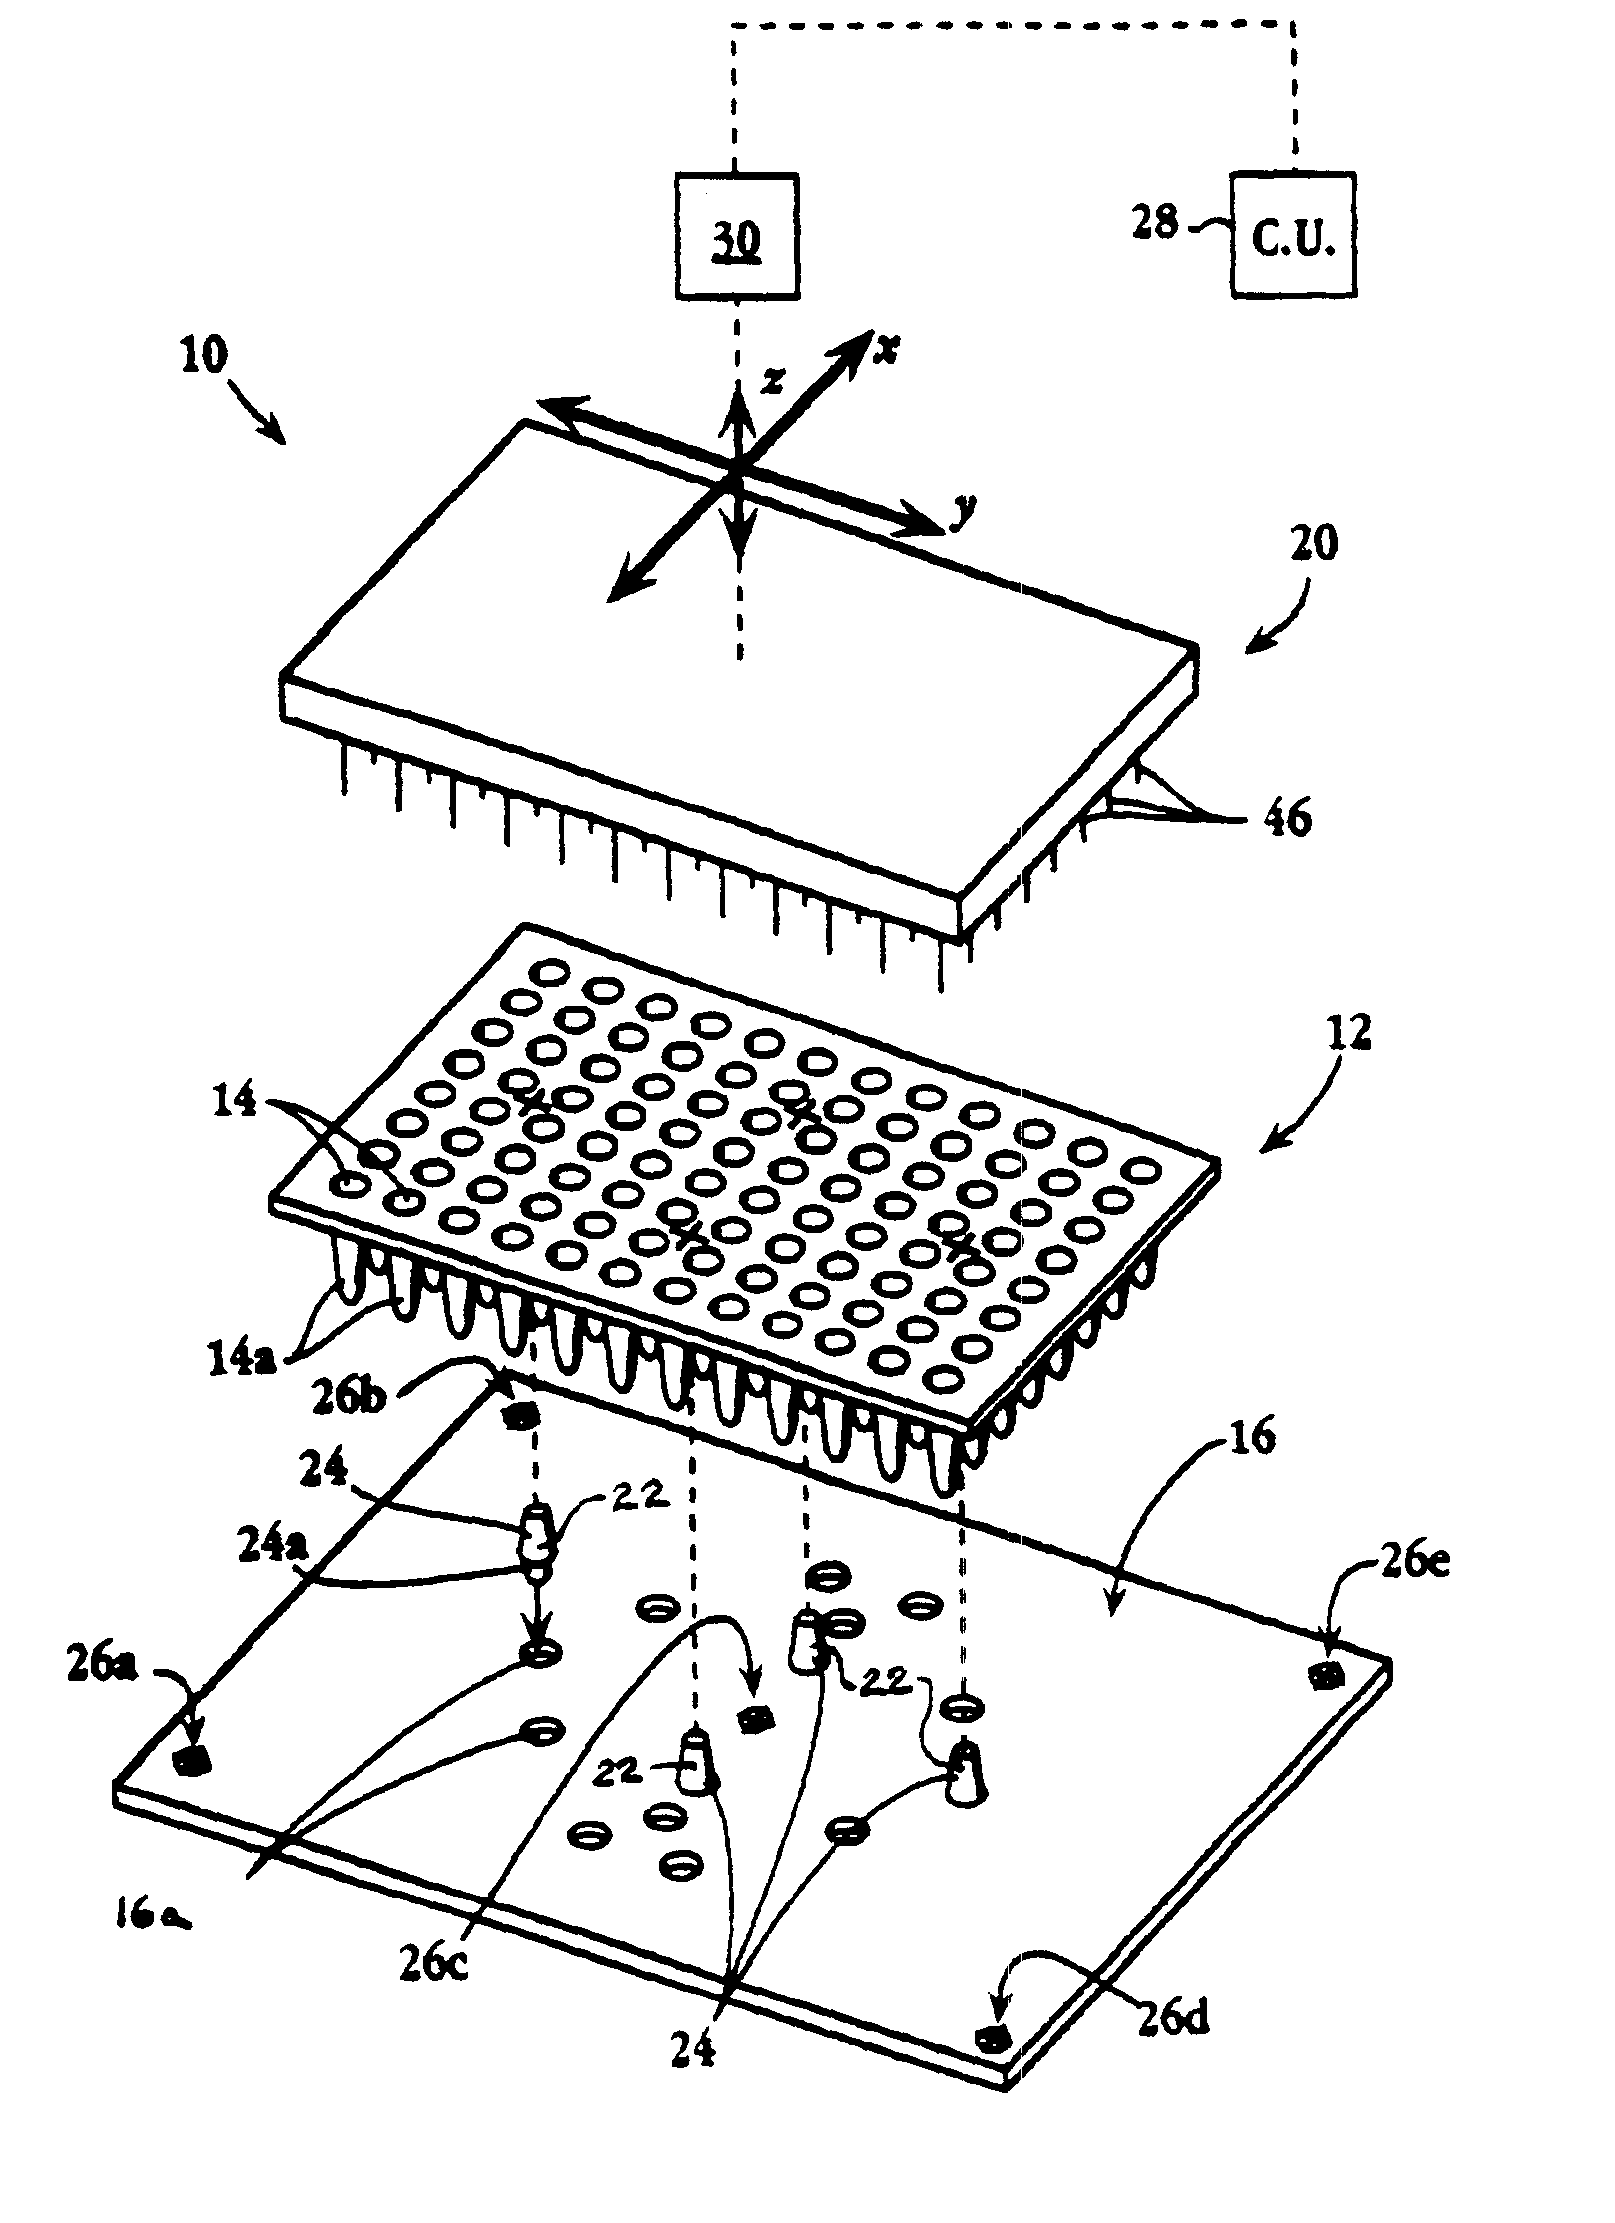 Apparatus for the precise location of reaction plates